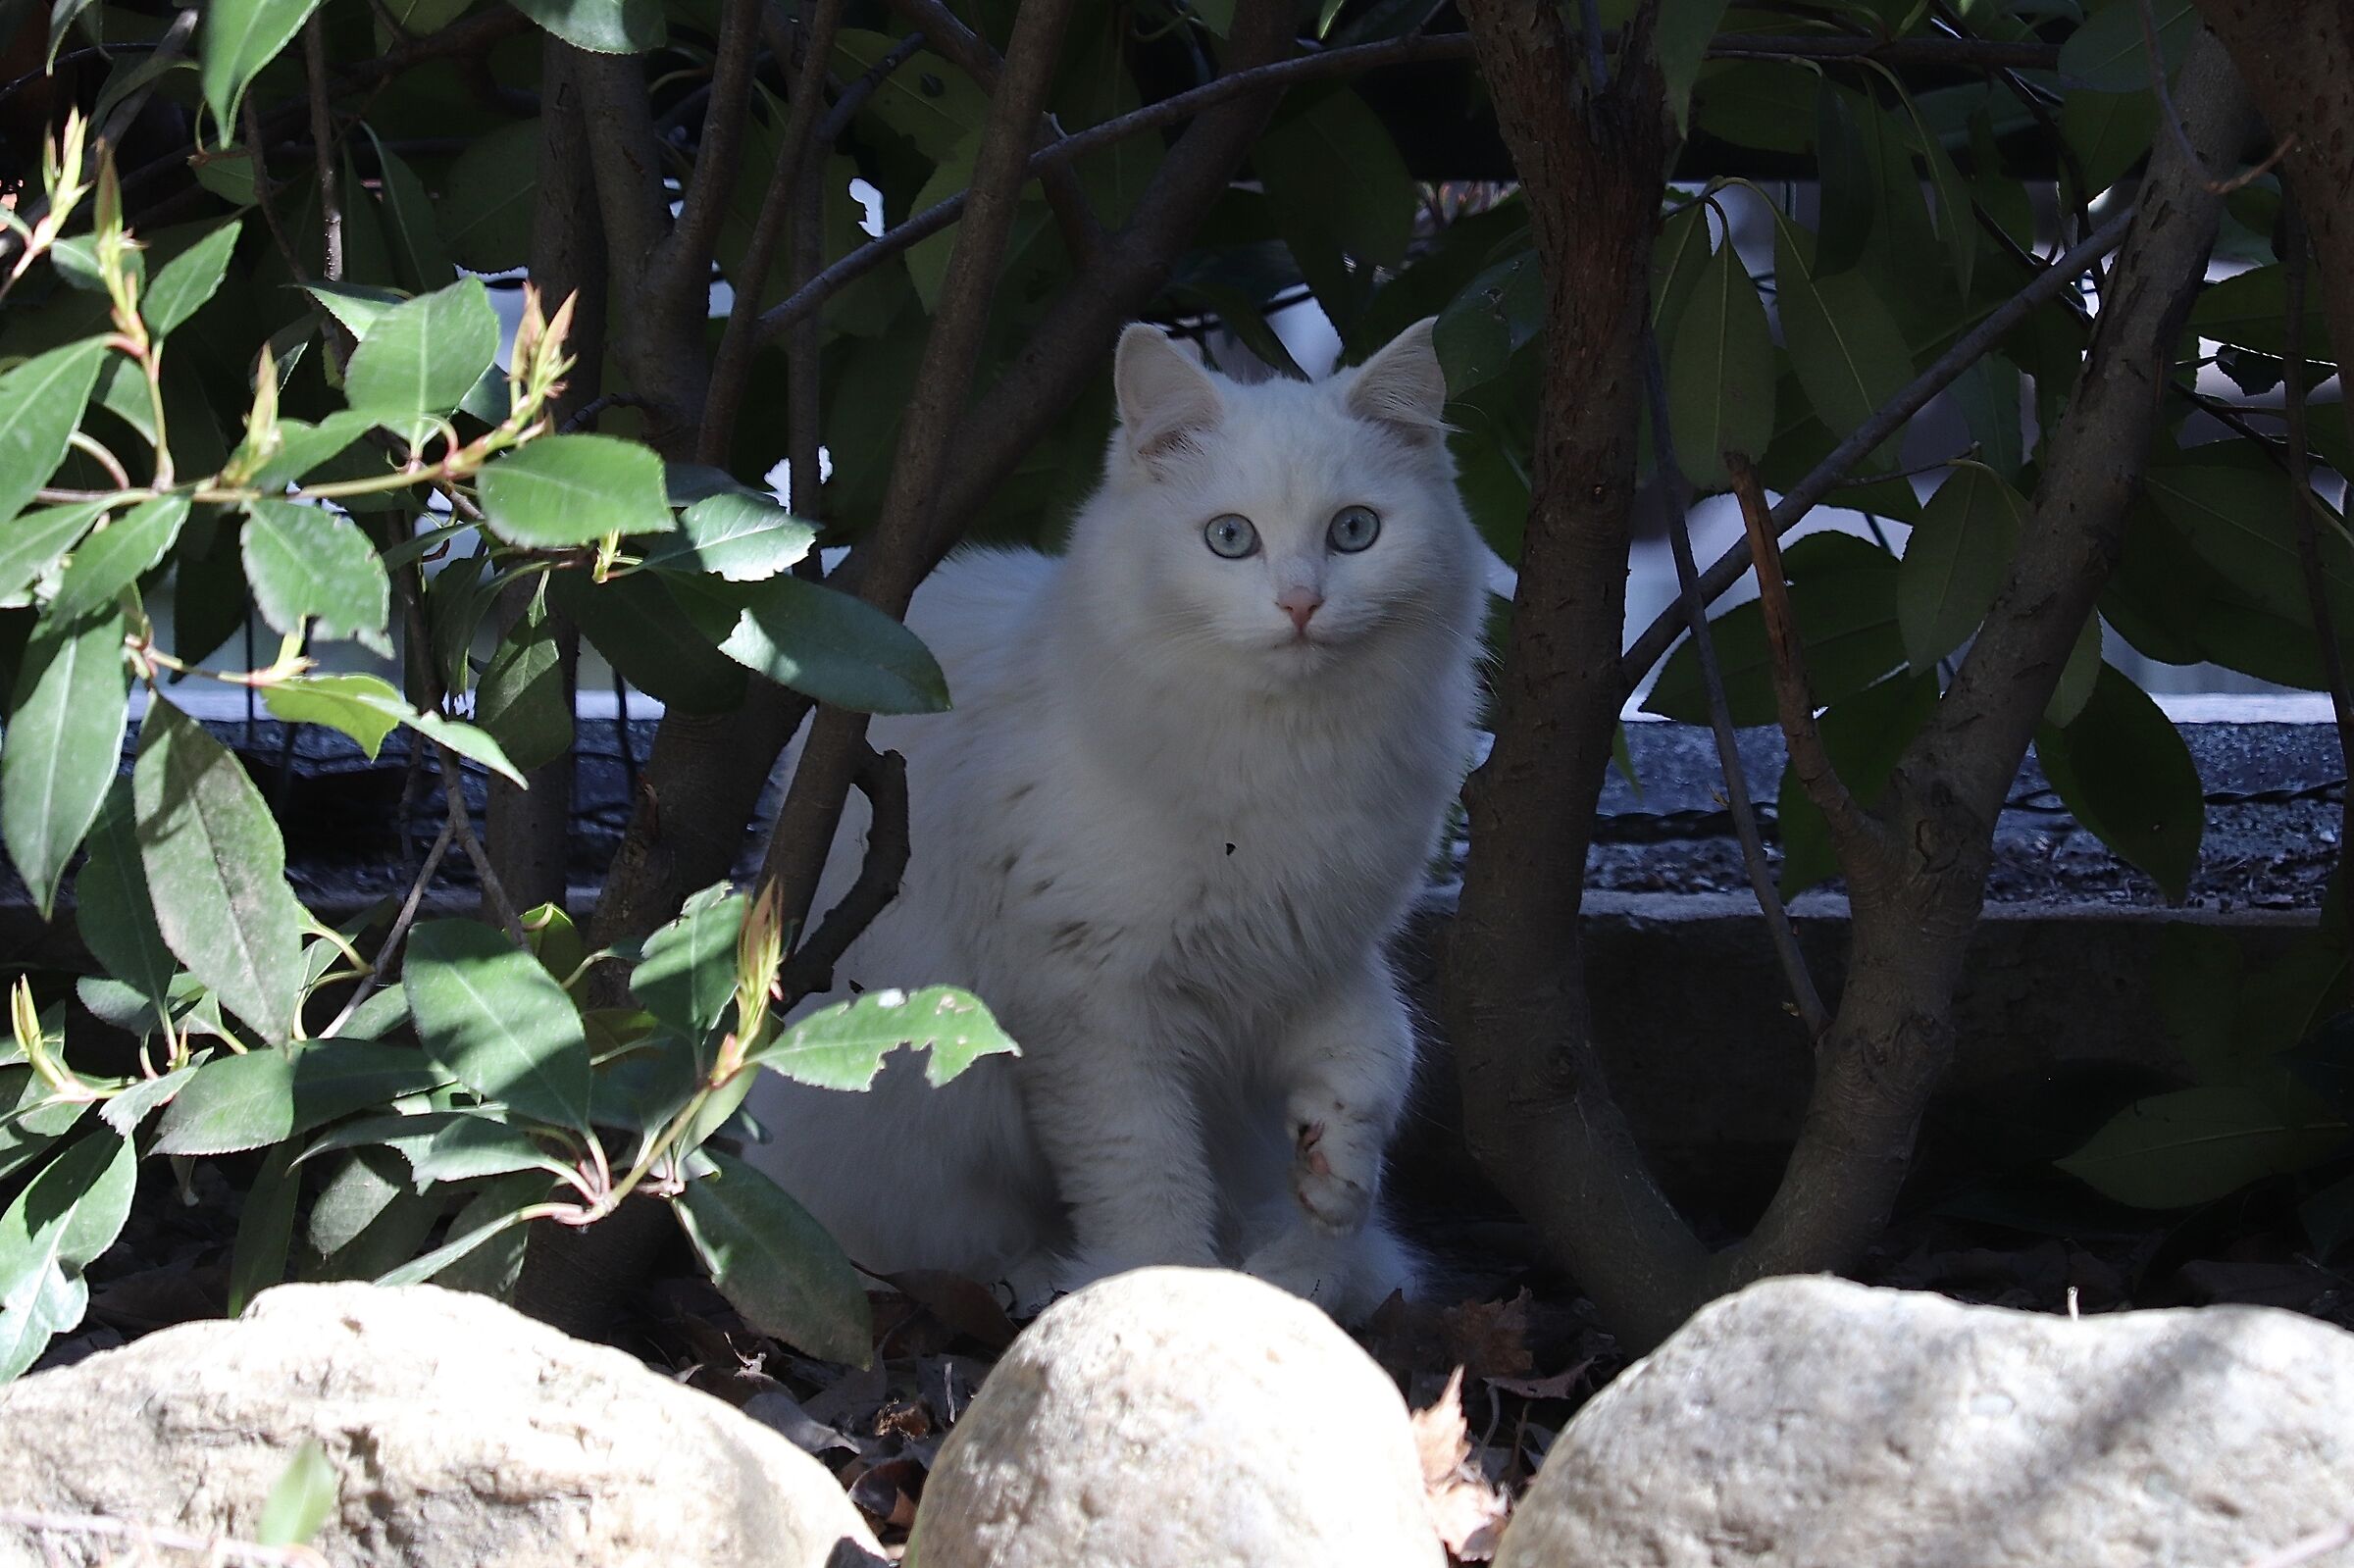 ... And the neighbor's cat spying on us!...